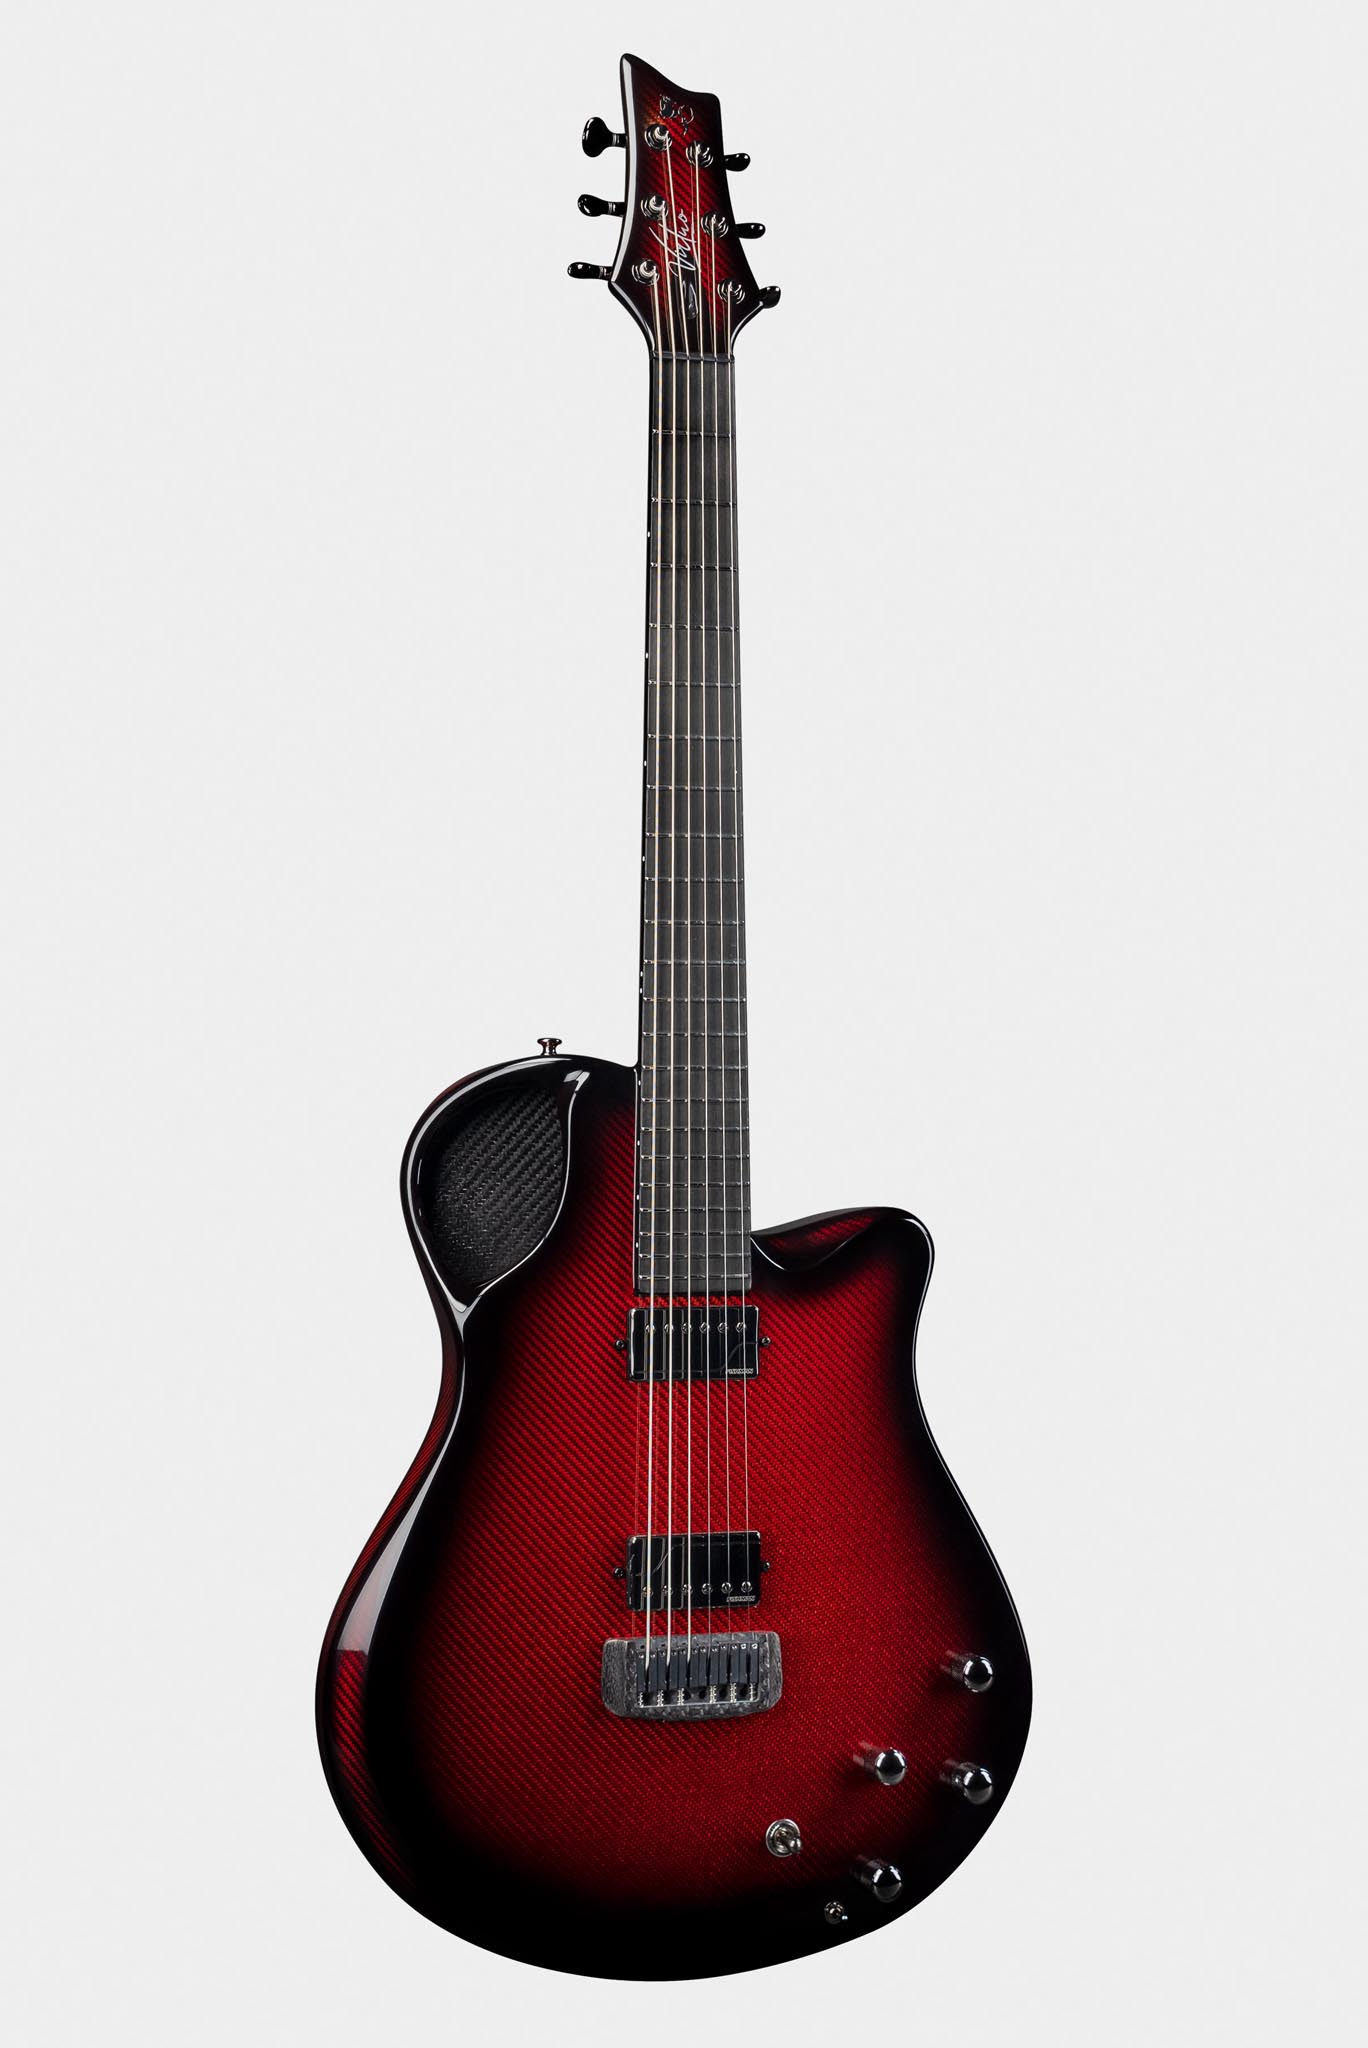 Virtuo Guitar with Red-Black Fade Finish